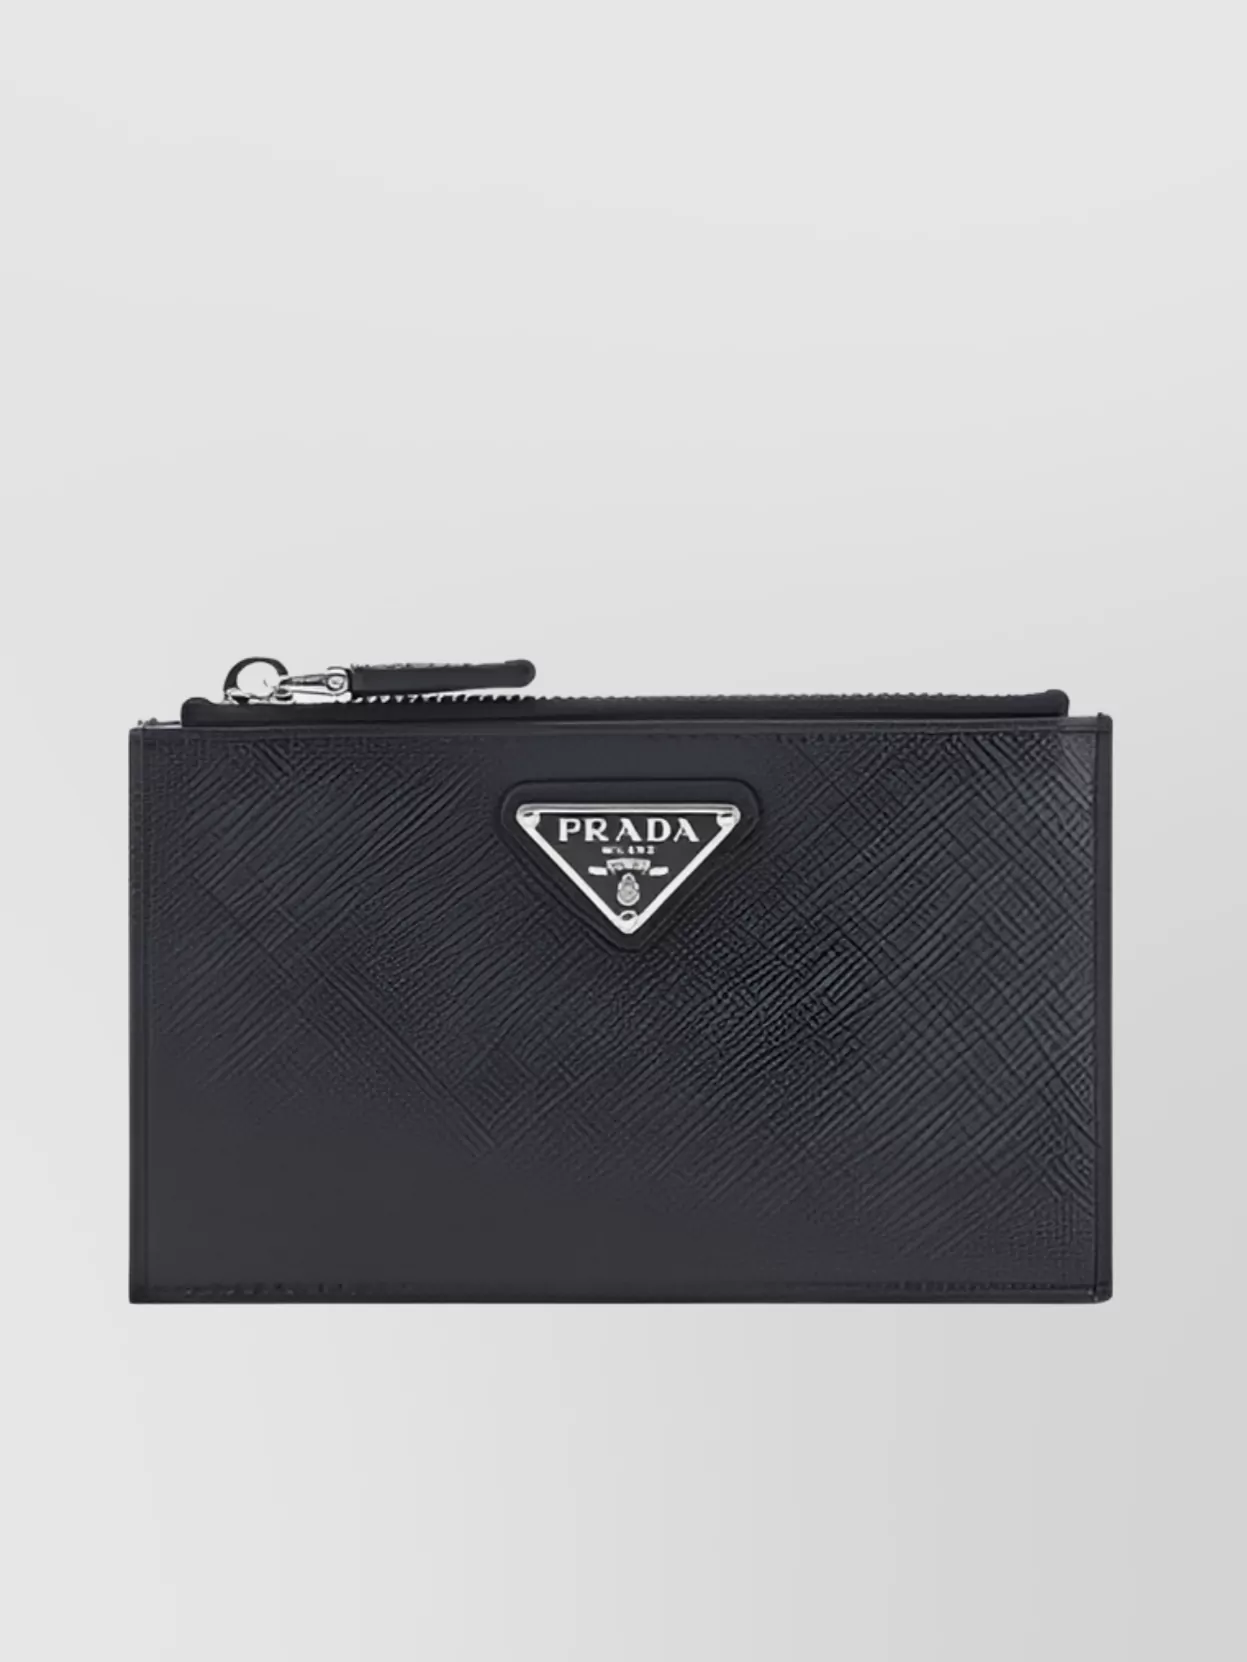 Prada Grained Leather Card Holder With Textured Finish